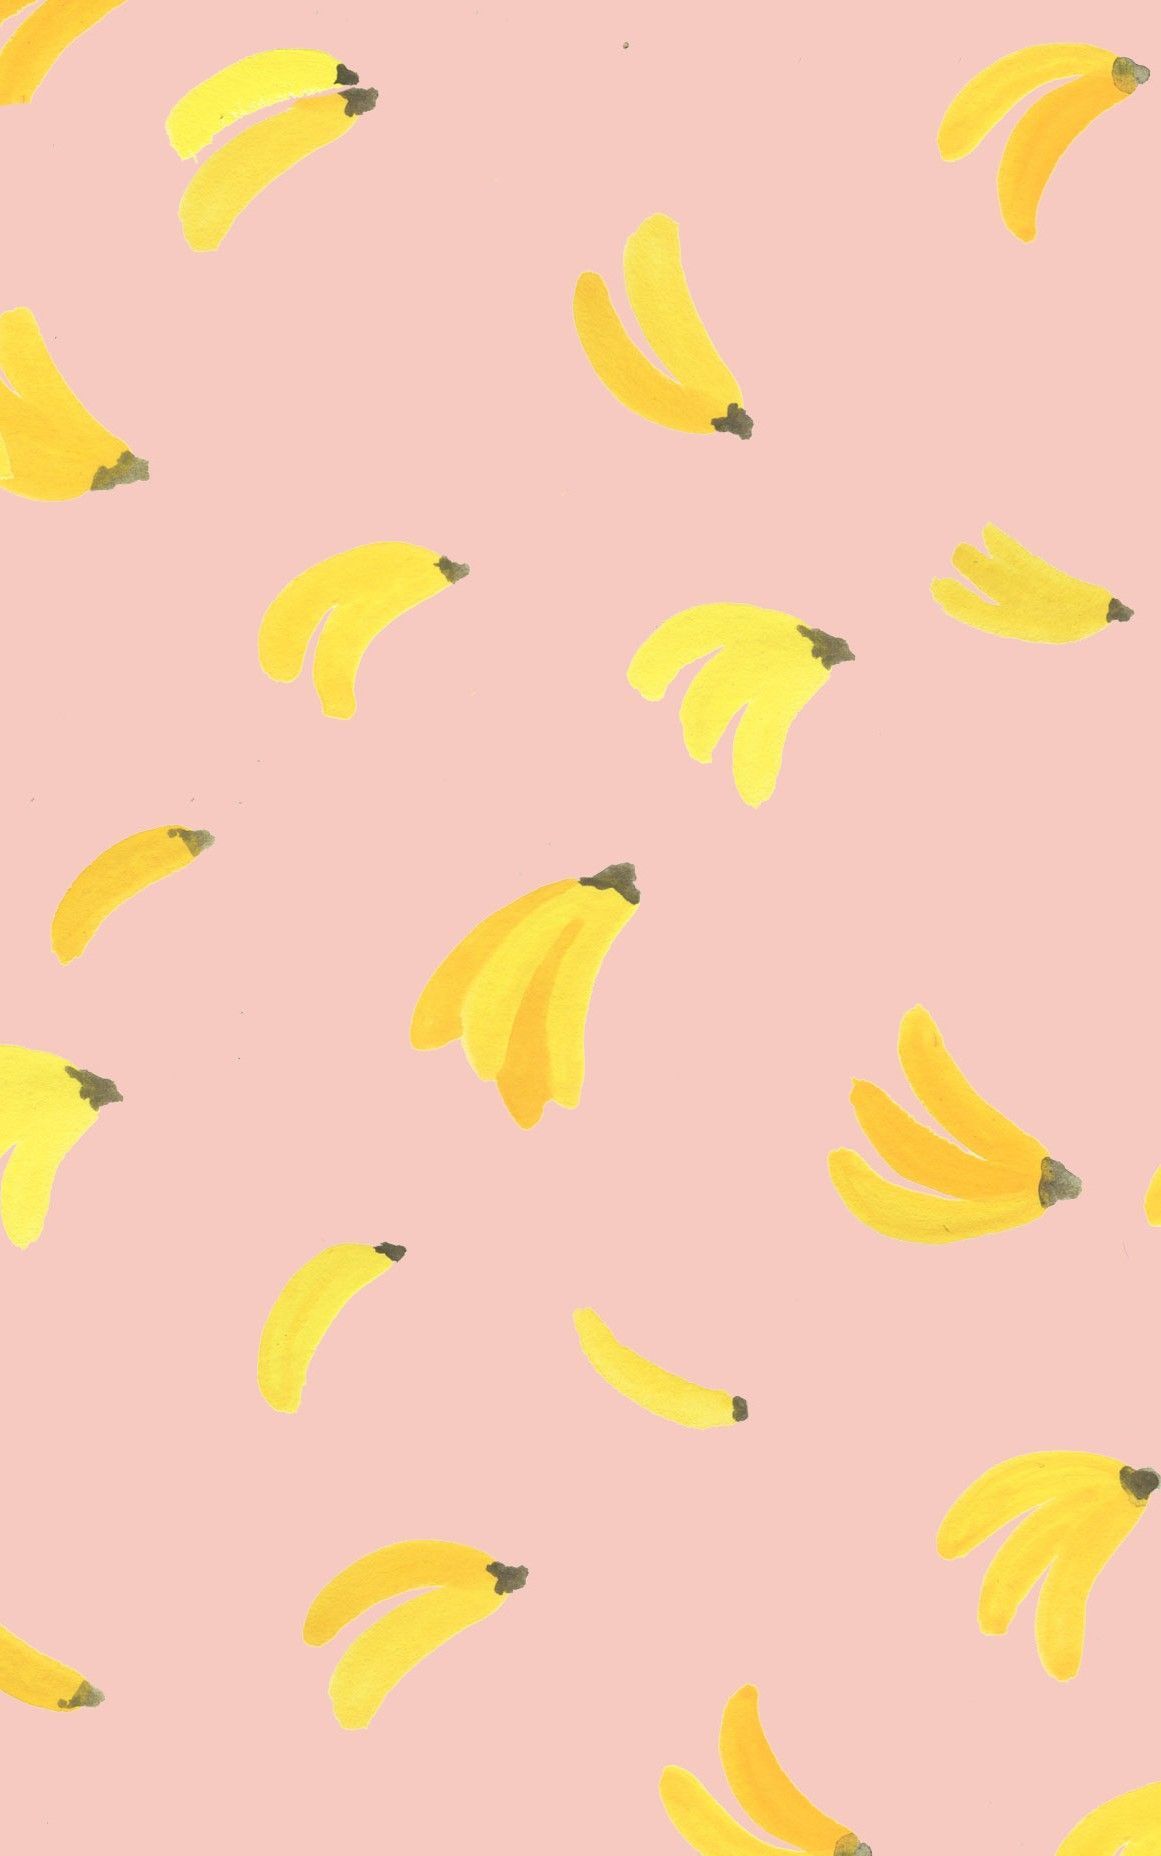 A pink background with bananas on it - Banana, Apple Watch